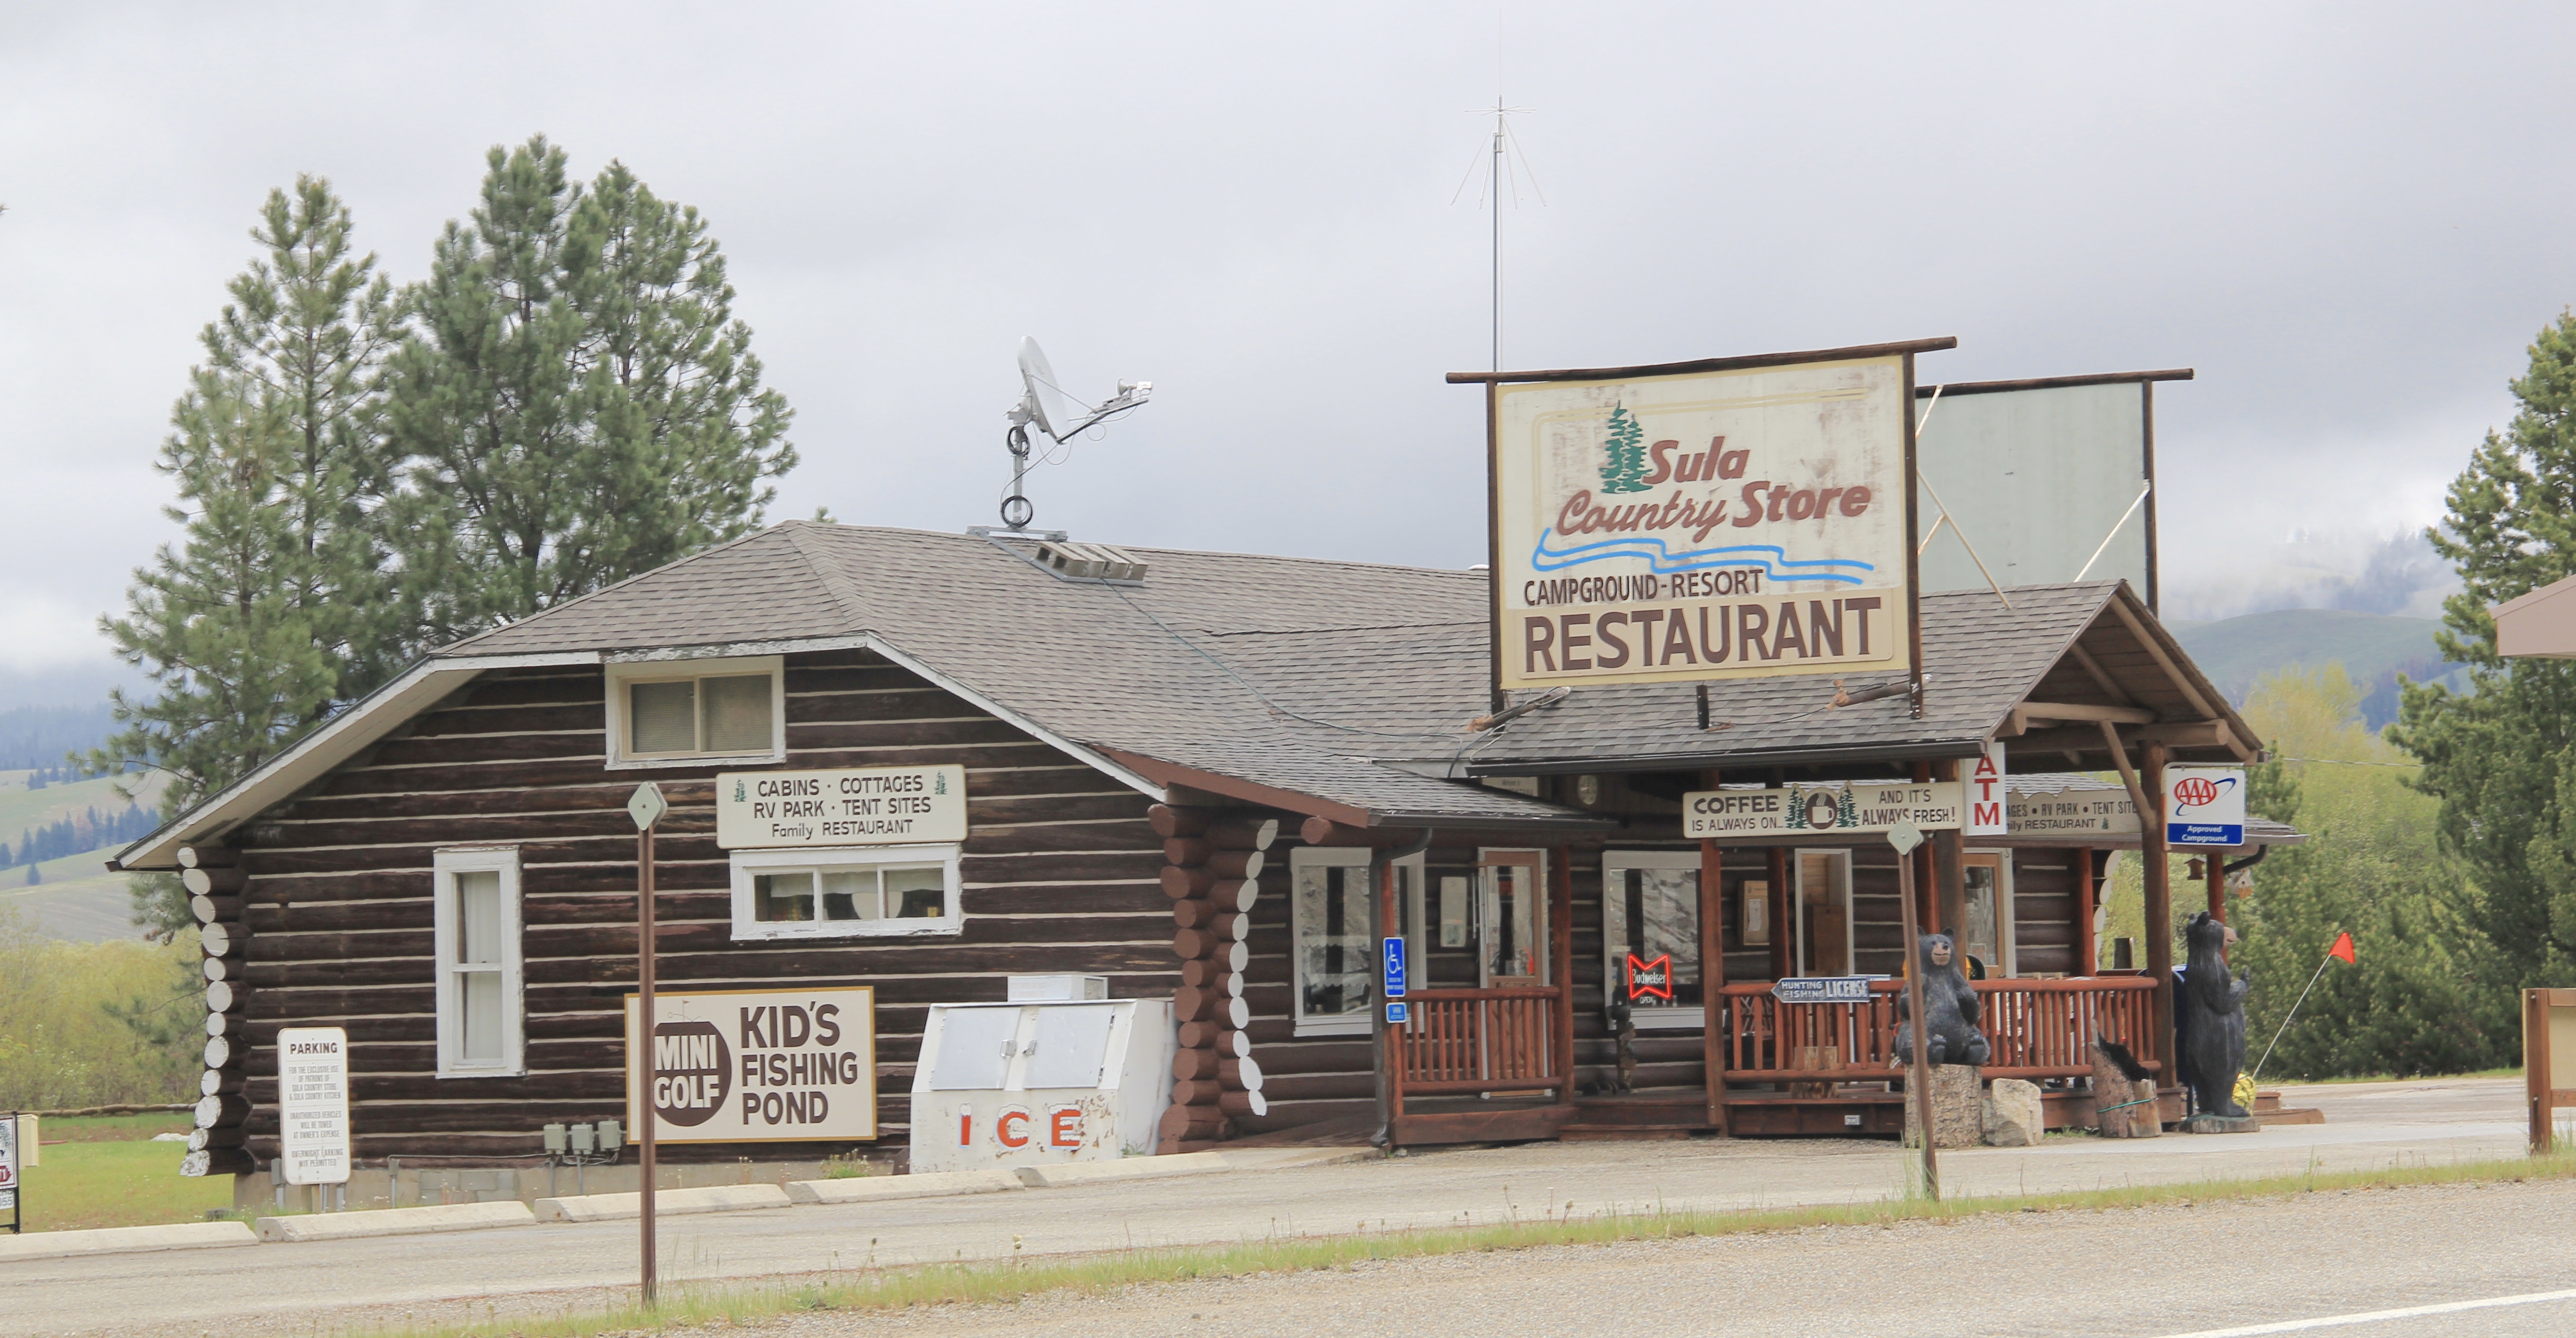 Ravalli County Sula country store, US 93